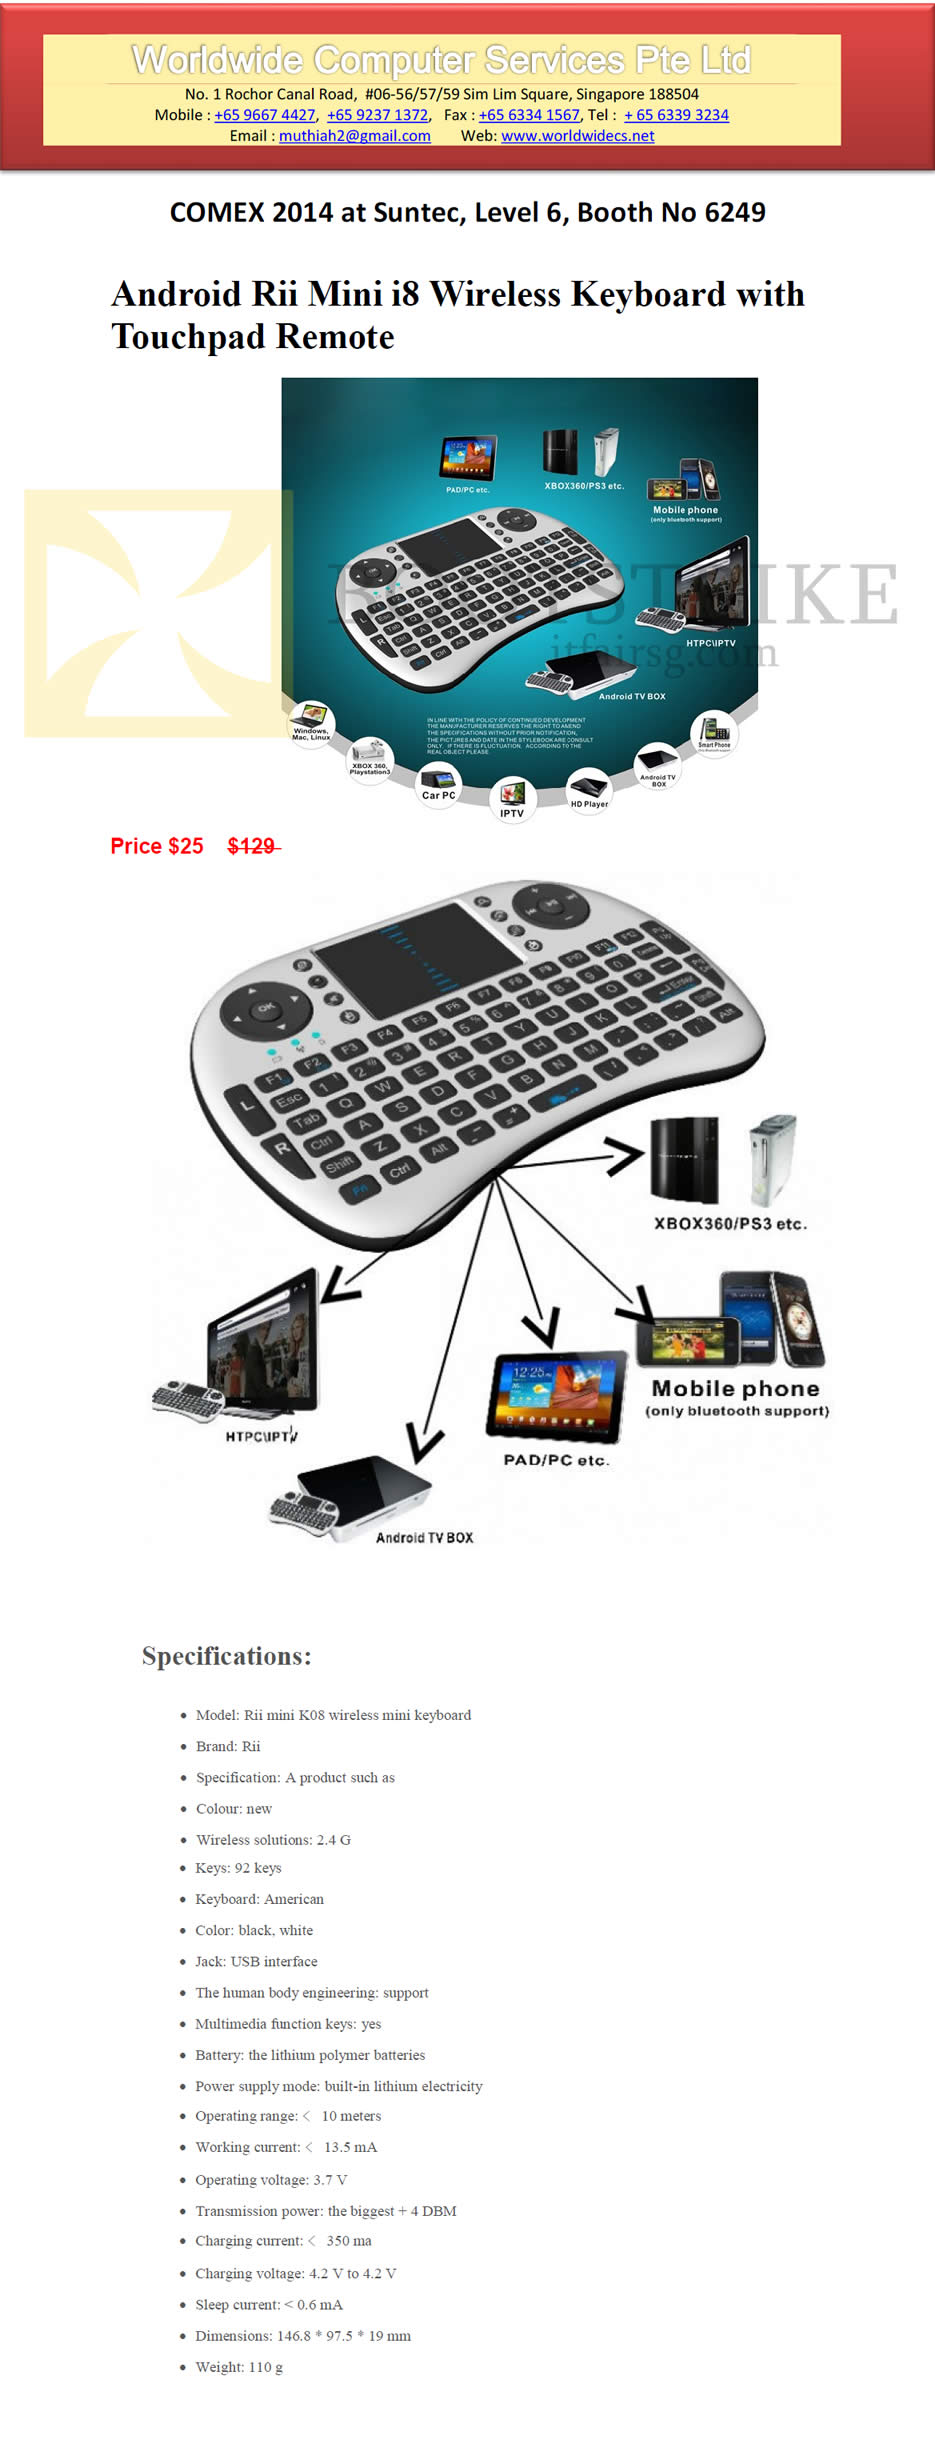 COMEX 2014 price list image brochure of Worldwide Computer Services Android Rii Mini I8 Wireless Keyboard